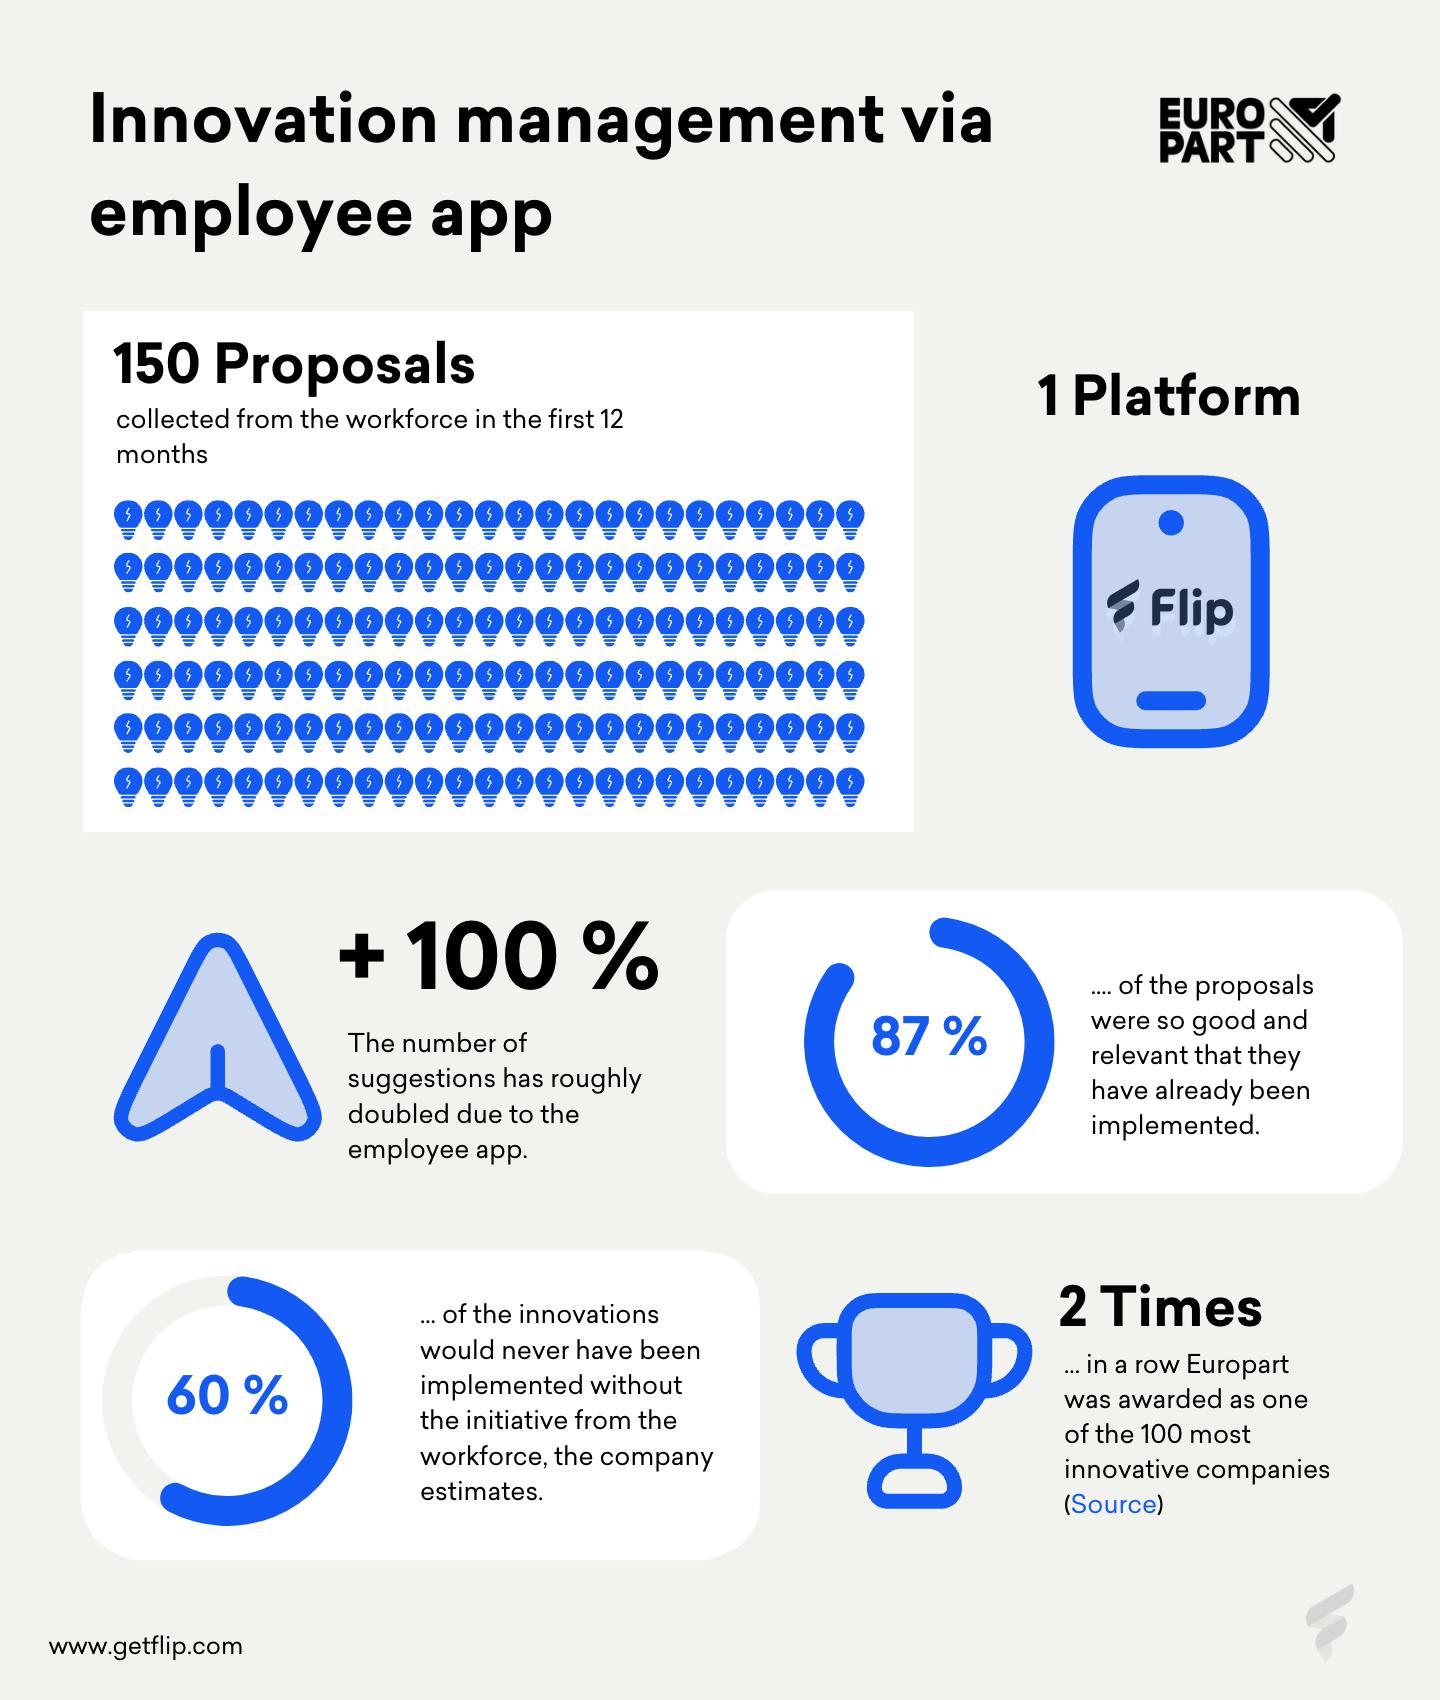 Infographic Employee engagement and idea management at Europart via employee app